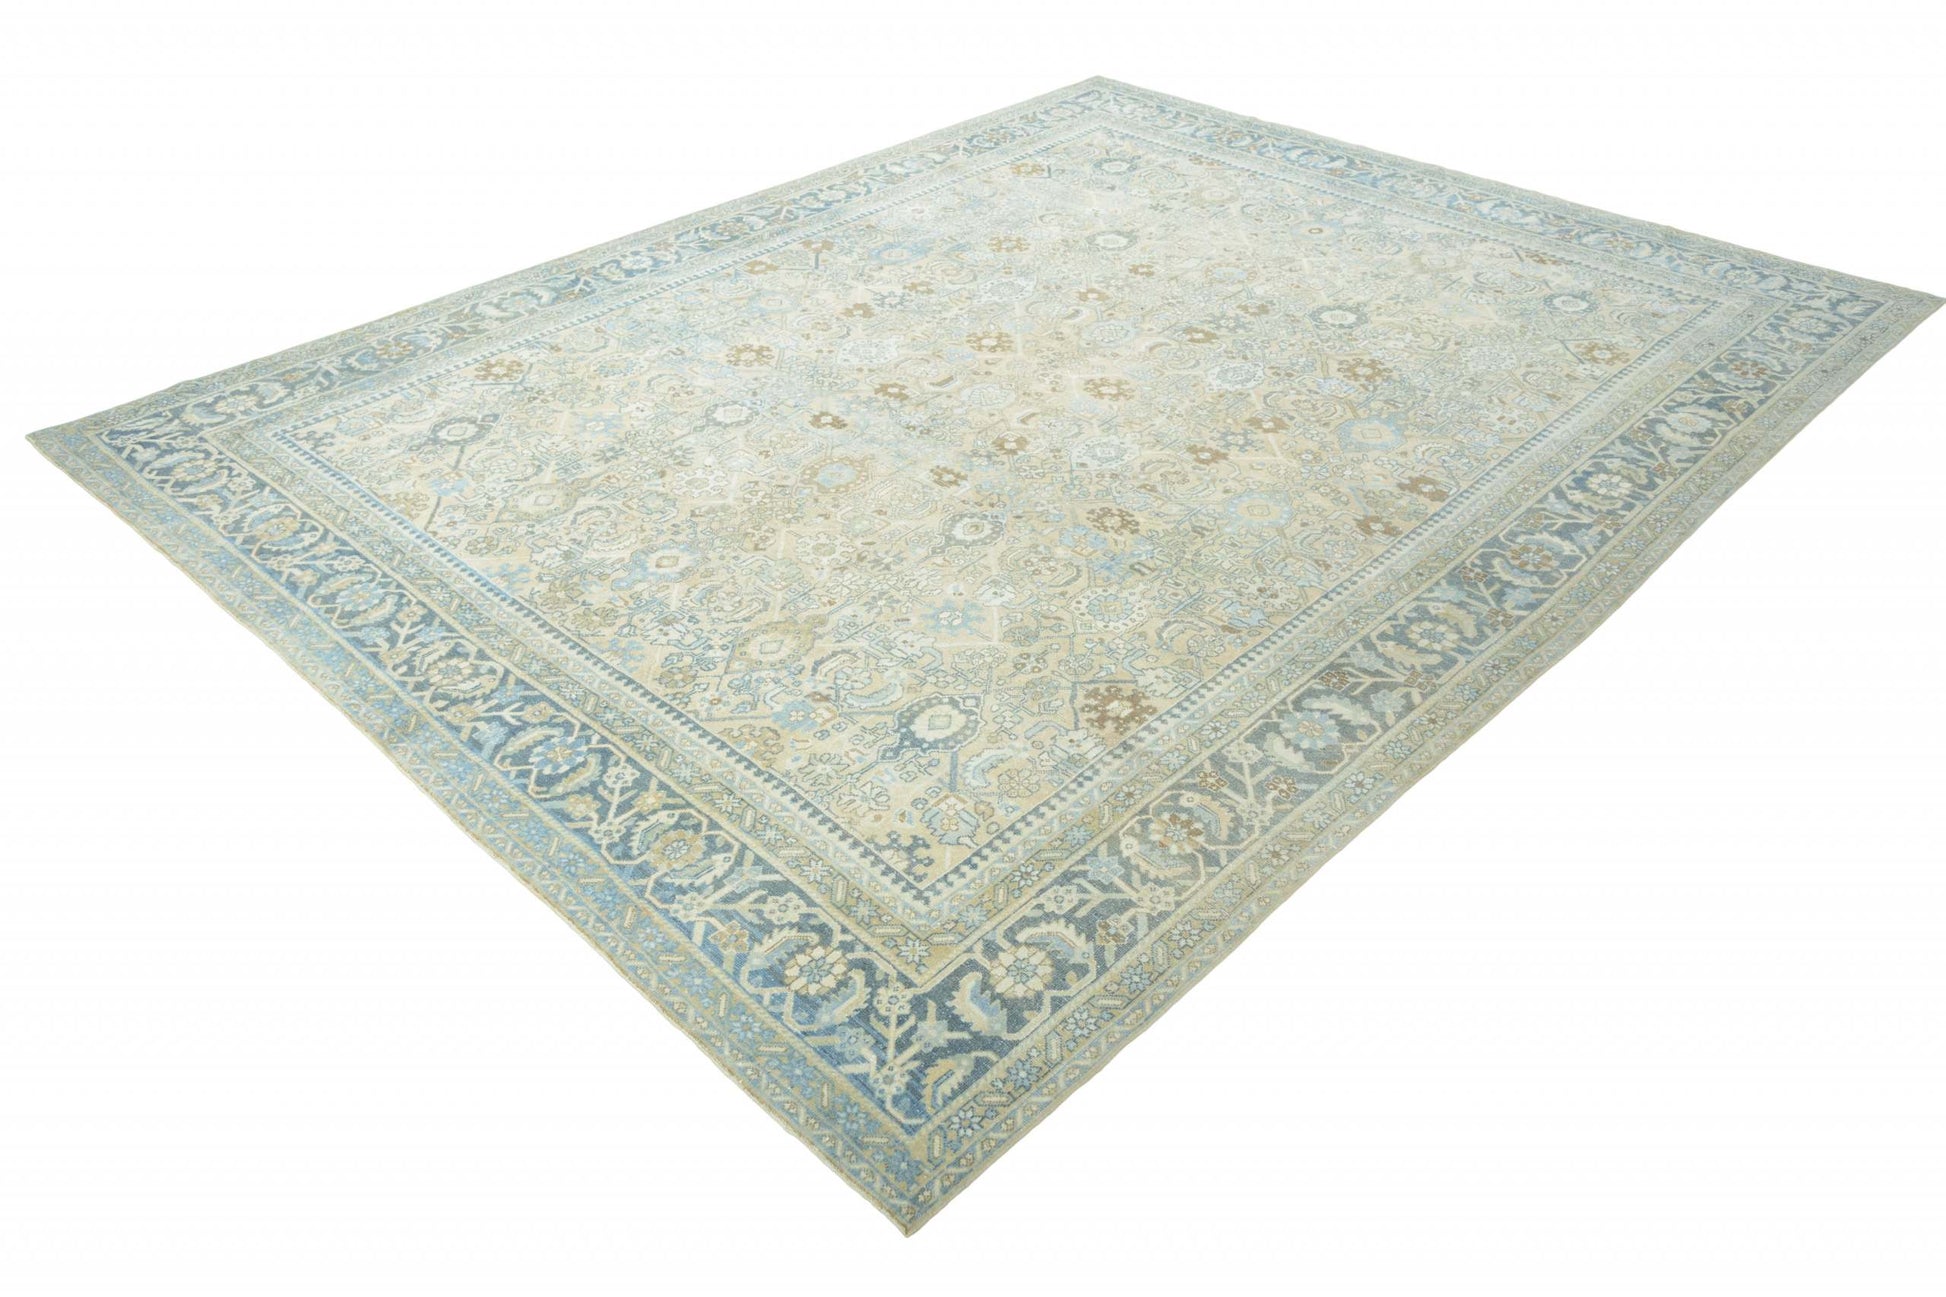 The rug's knots are green, beige, and light blue. 